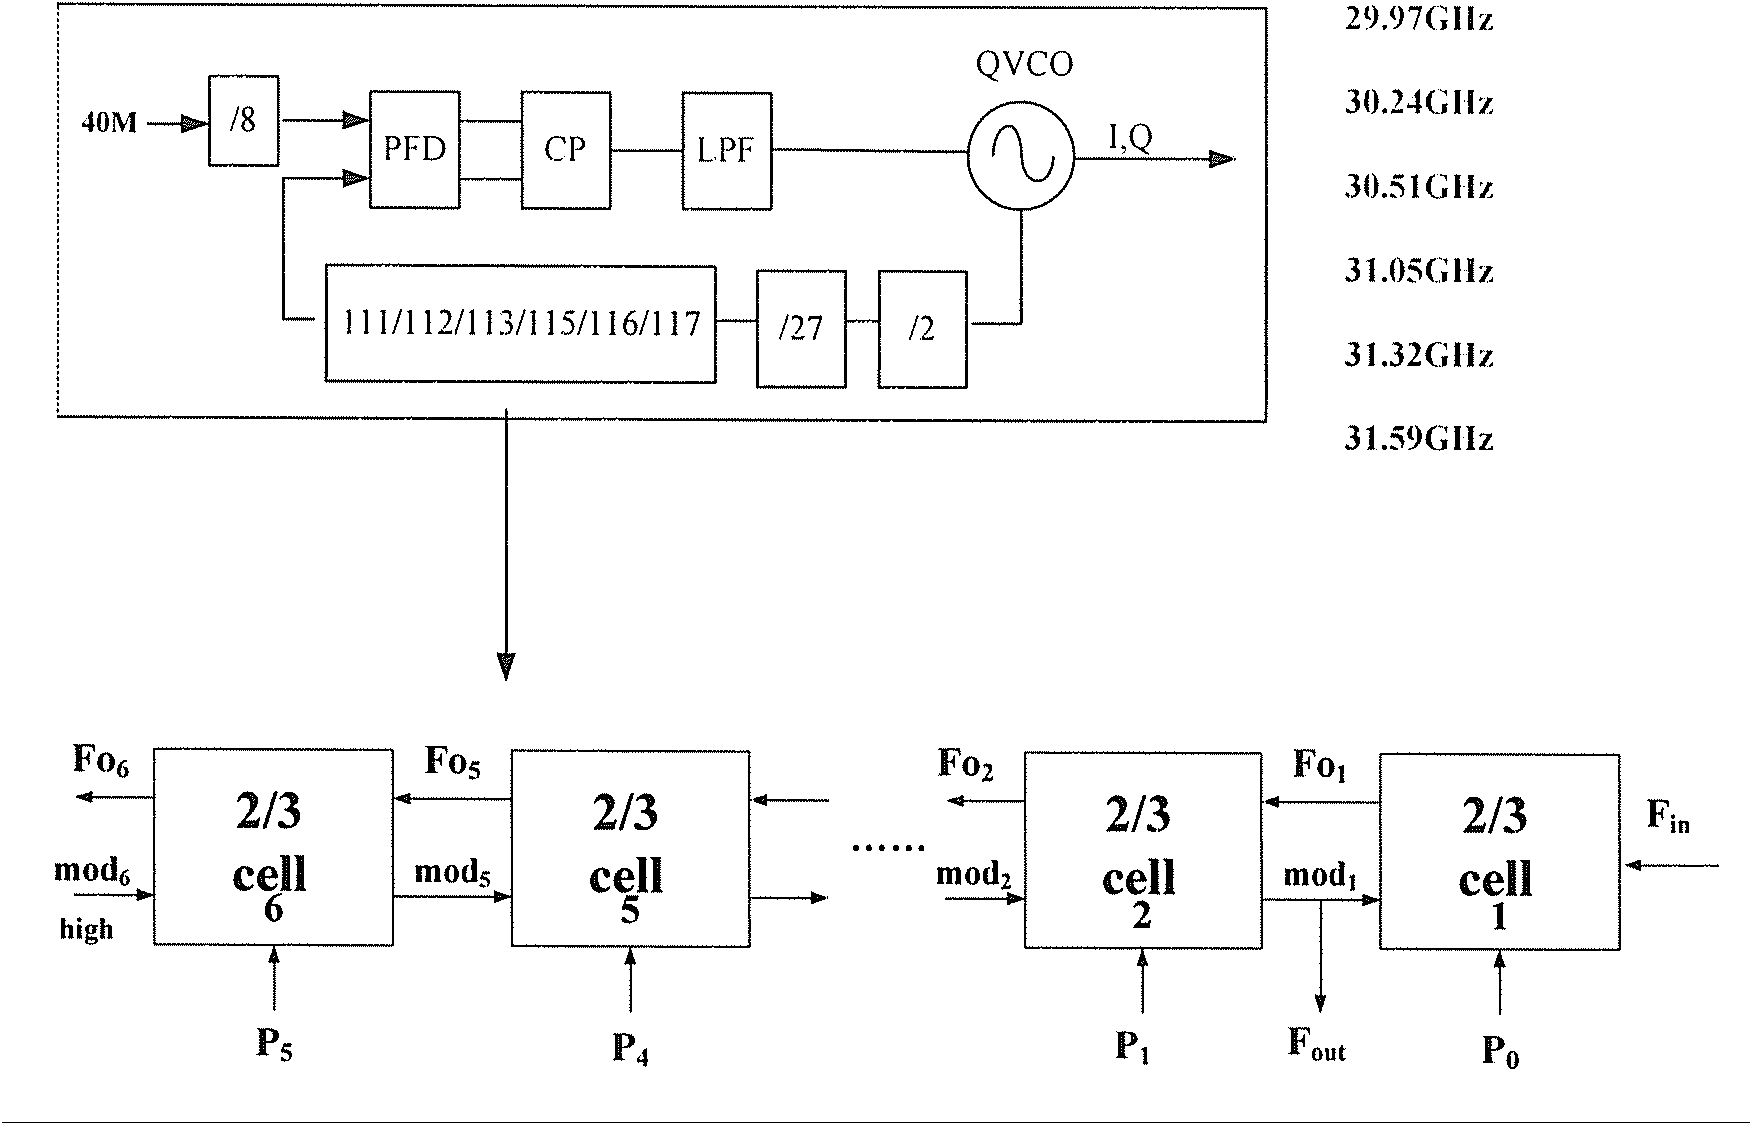 1:1 structural 40MHz crystal oscillator frequency synthesizer for 60GHz wireless communication